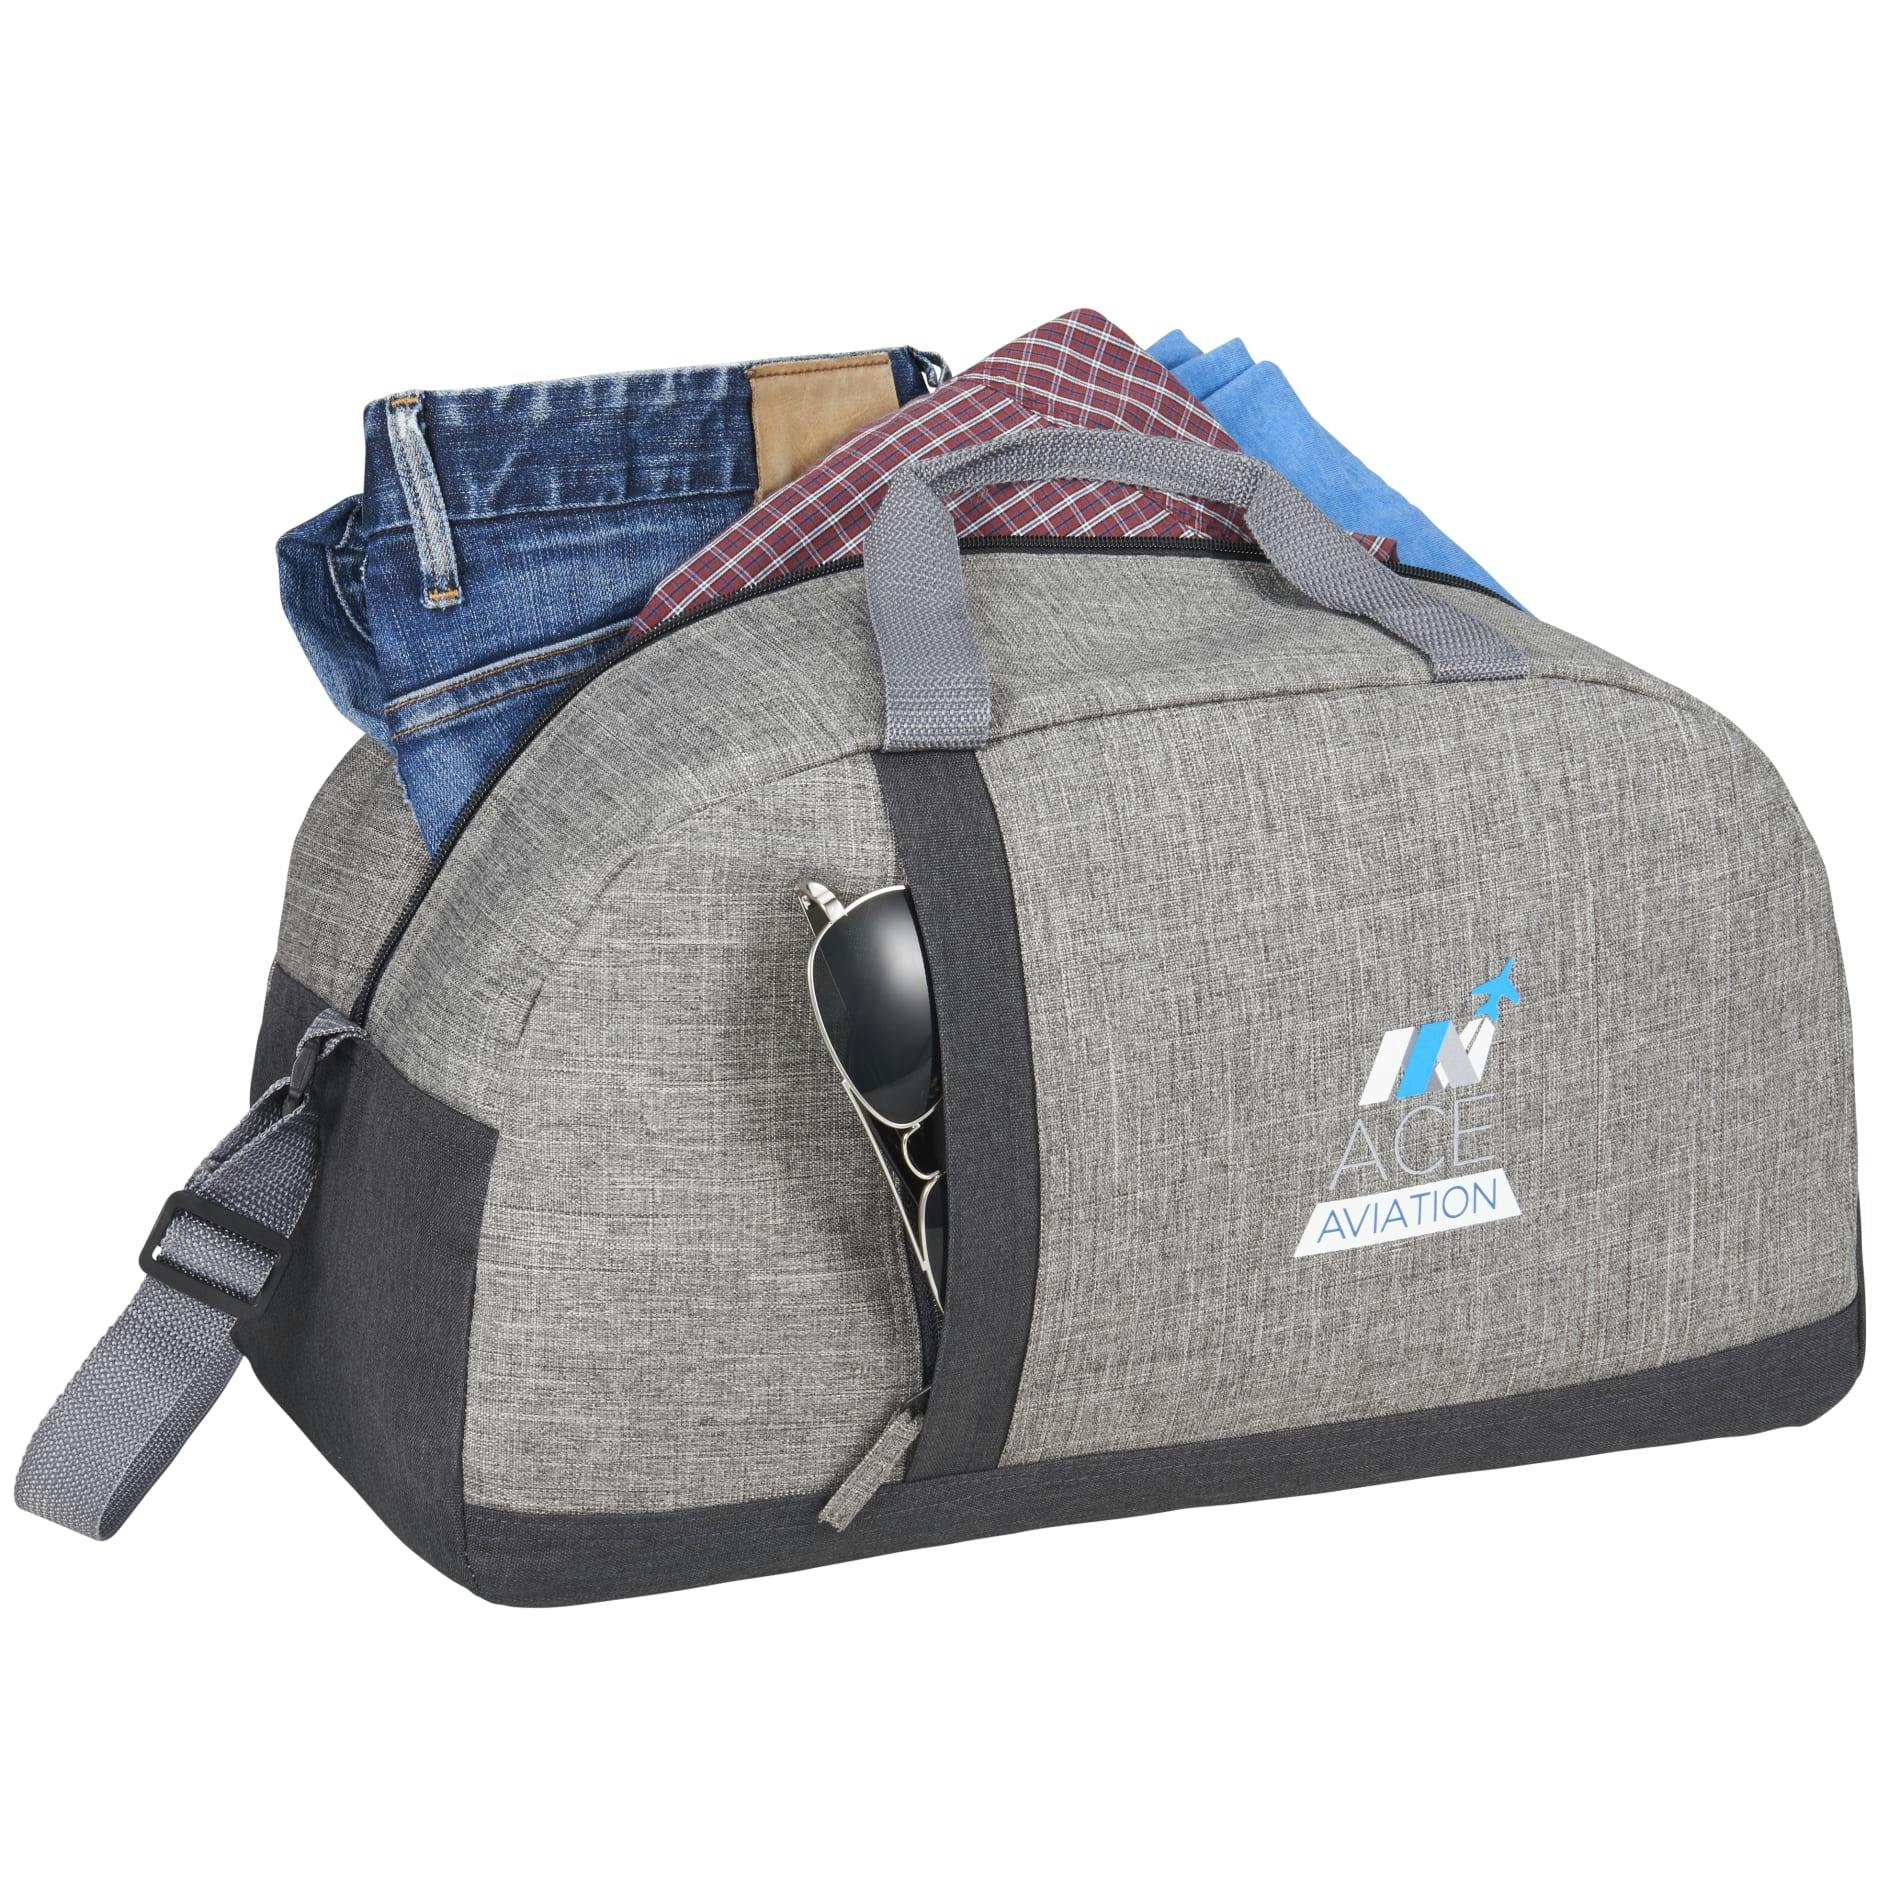 Reclaim Recycled Sport Duffel - additional Image 1